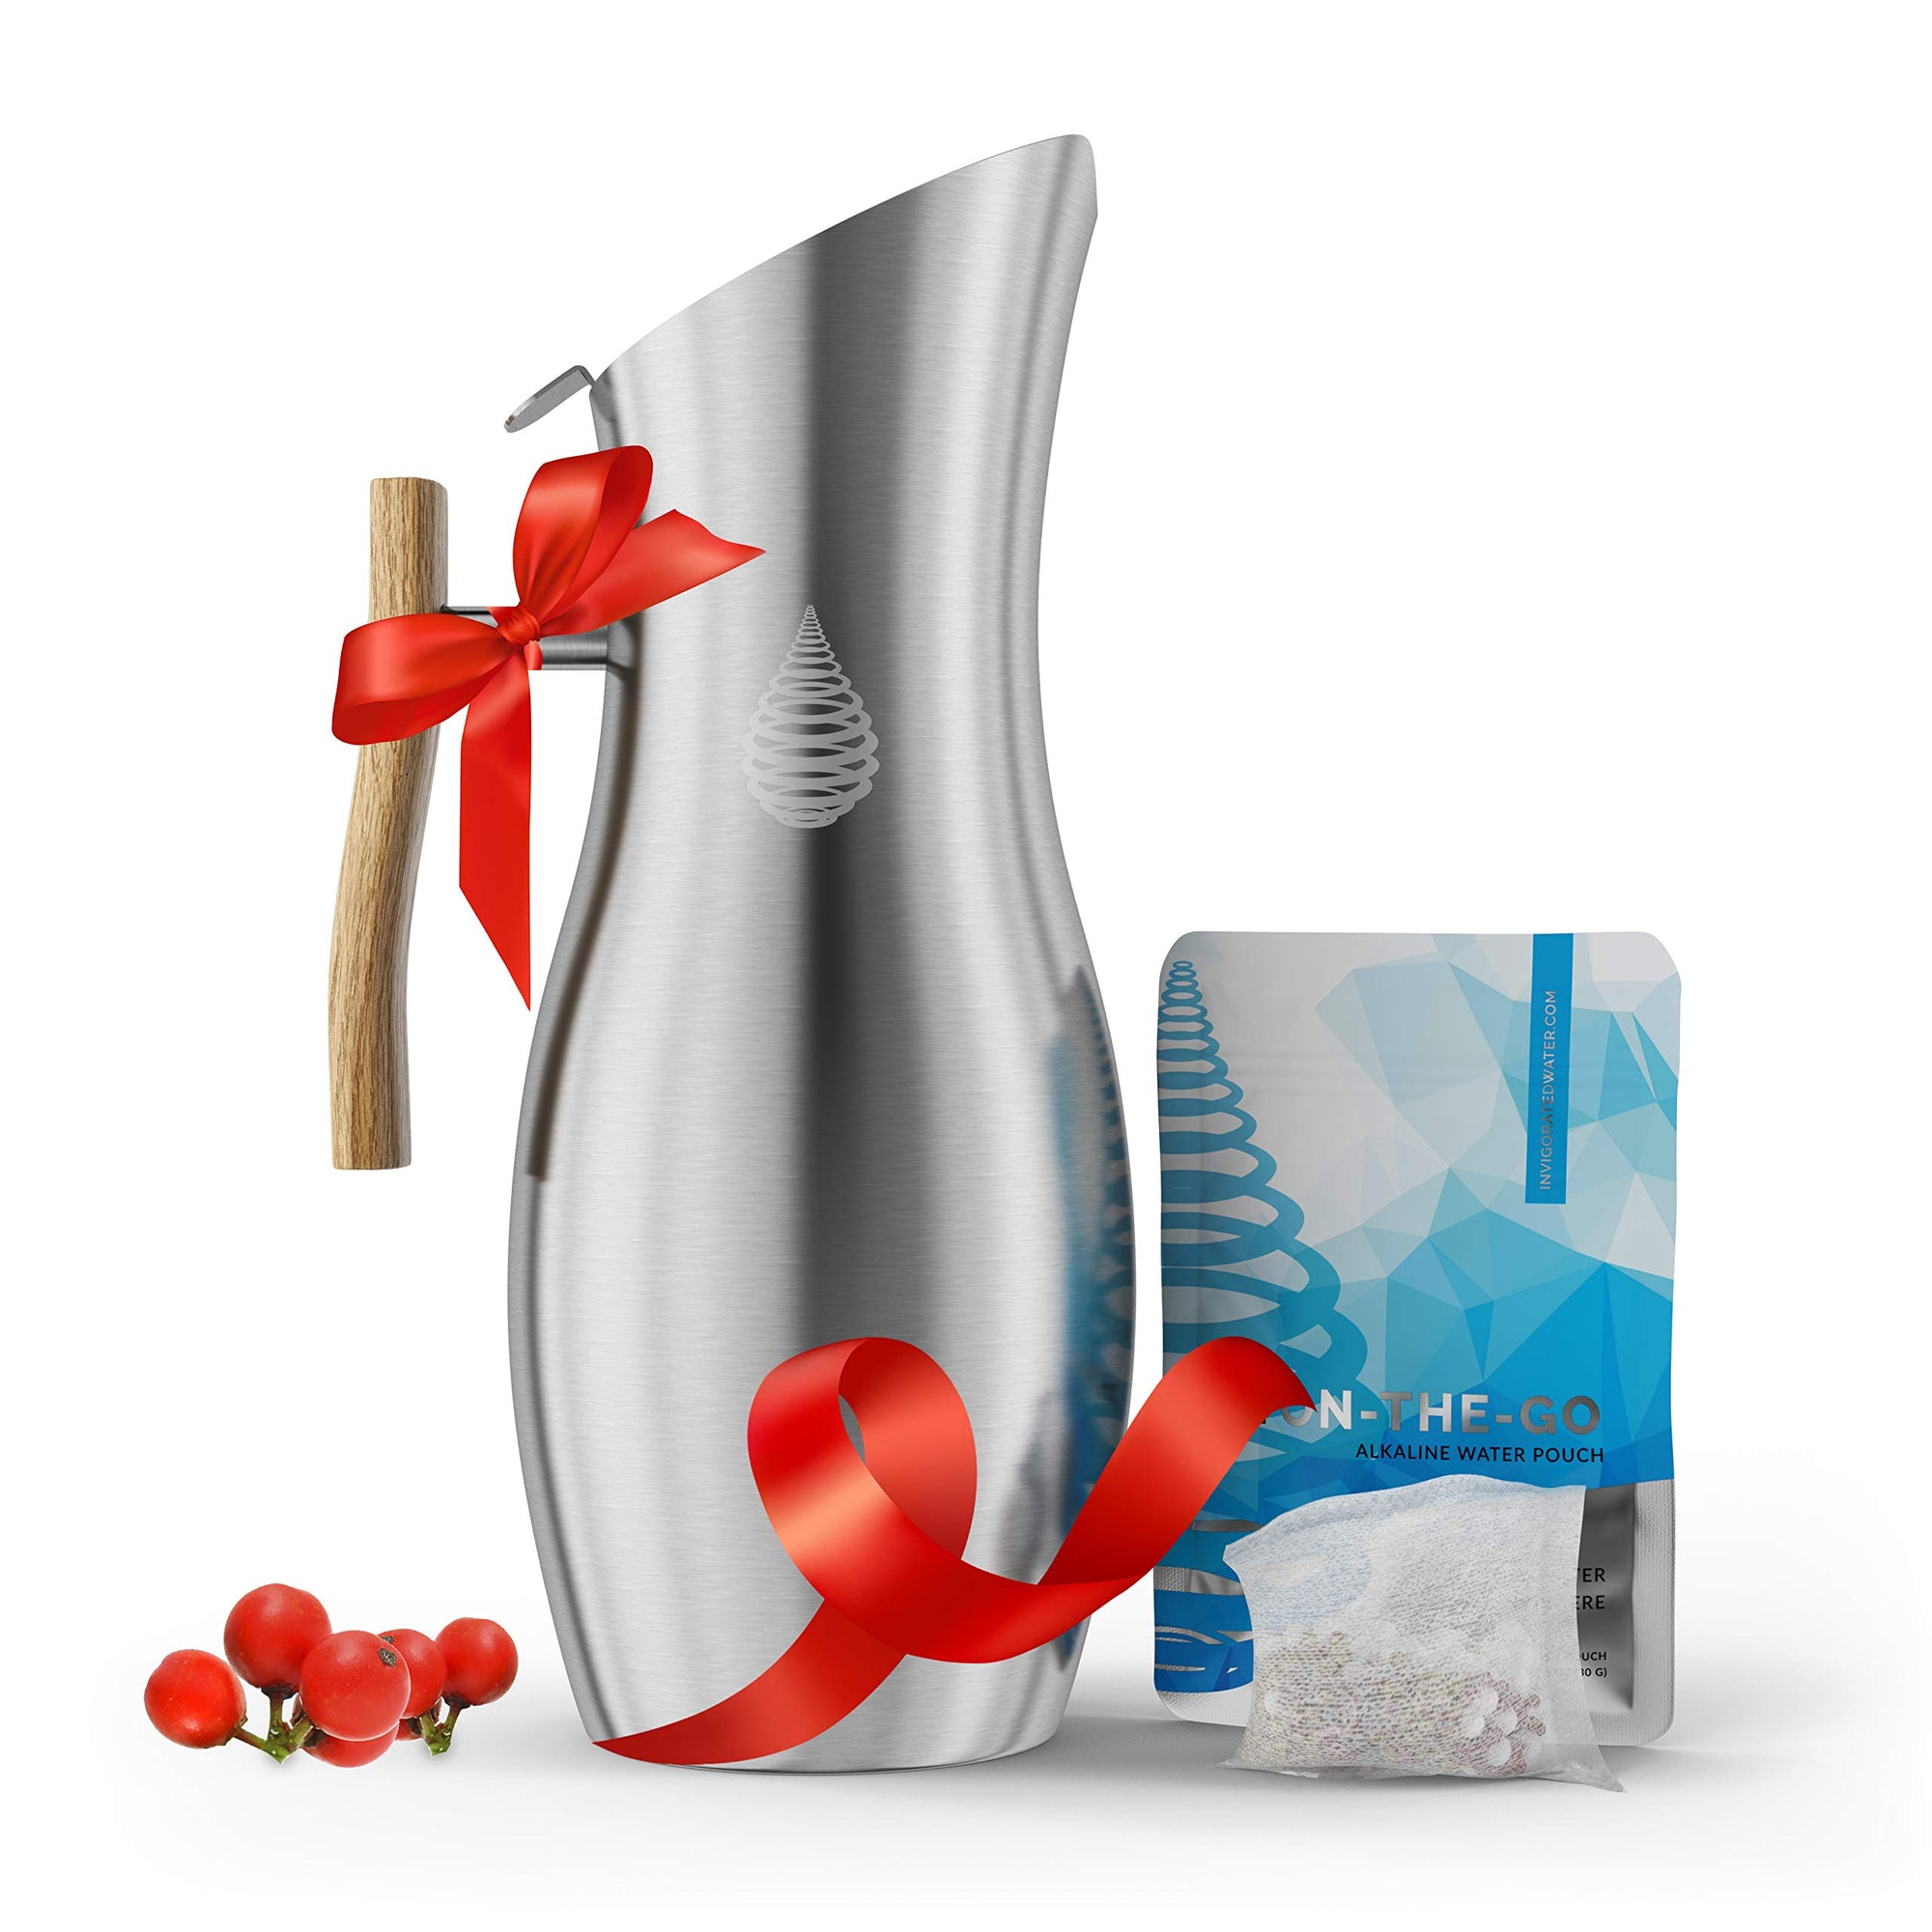 Invigorated Water pH Vitality Stainless Steel Alkaline Water Pitcher